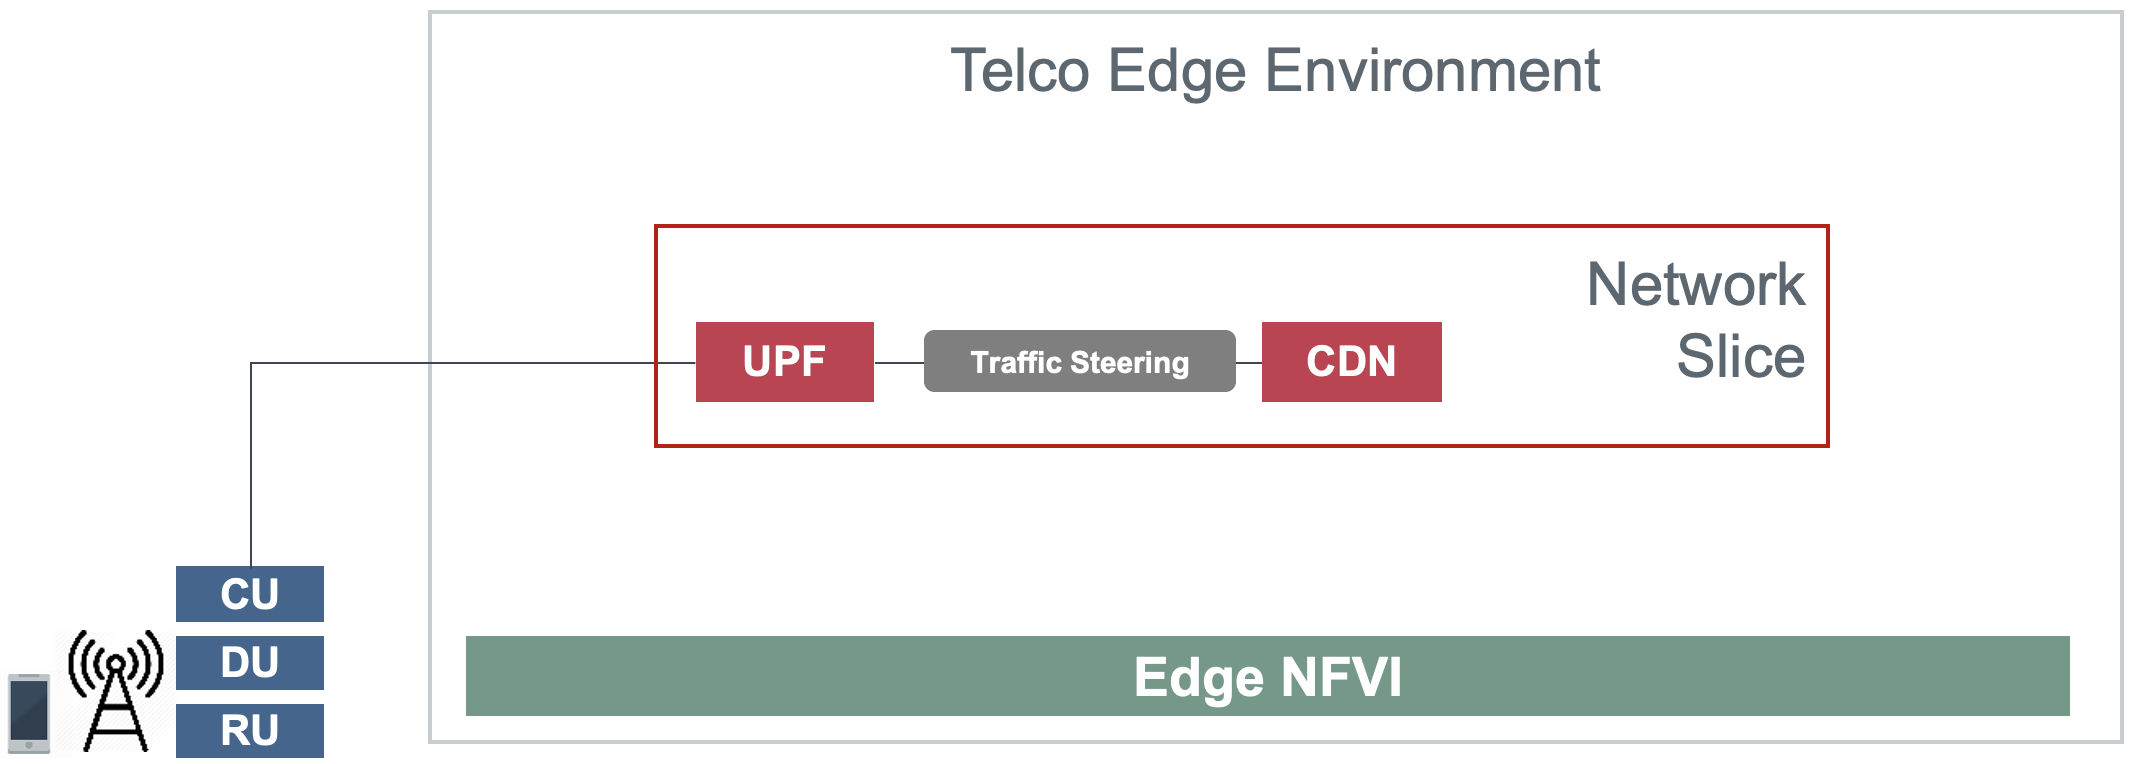 "Edge CDN with eMBB Core Network Slicing"